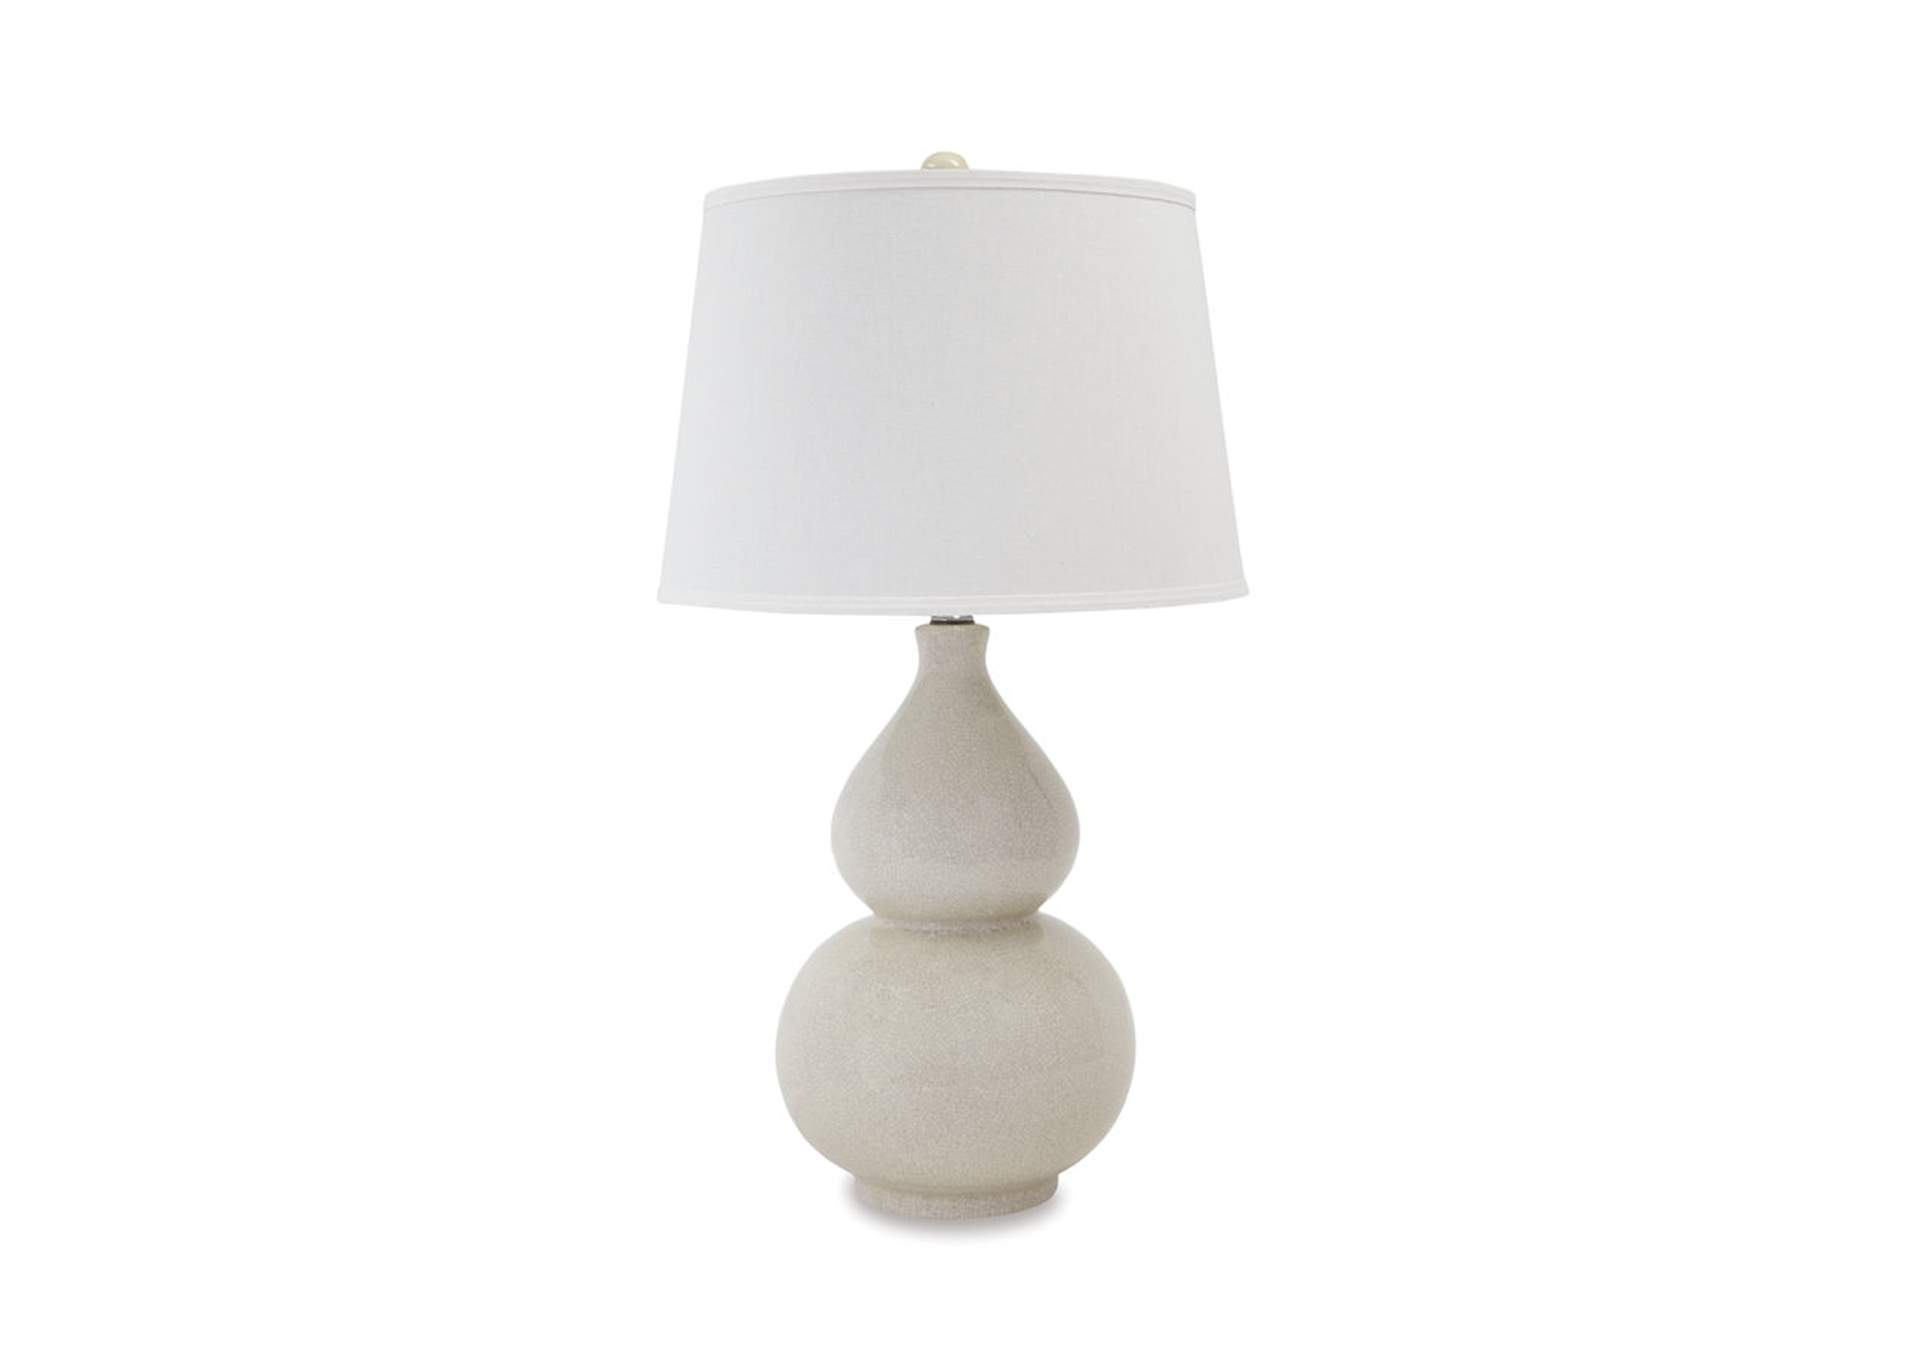 Saffi Table Lamp,Direct To Consumer Express